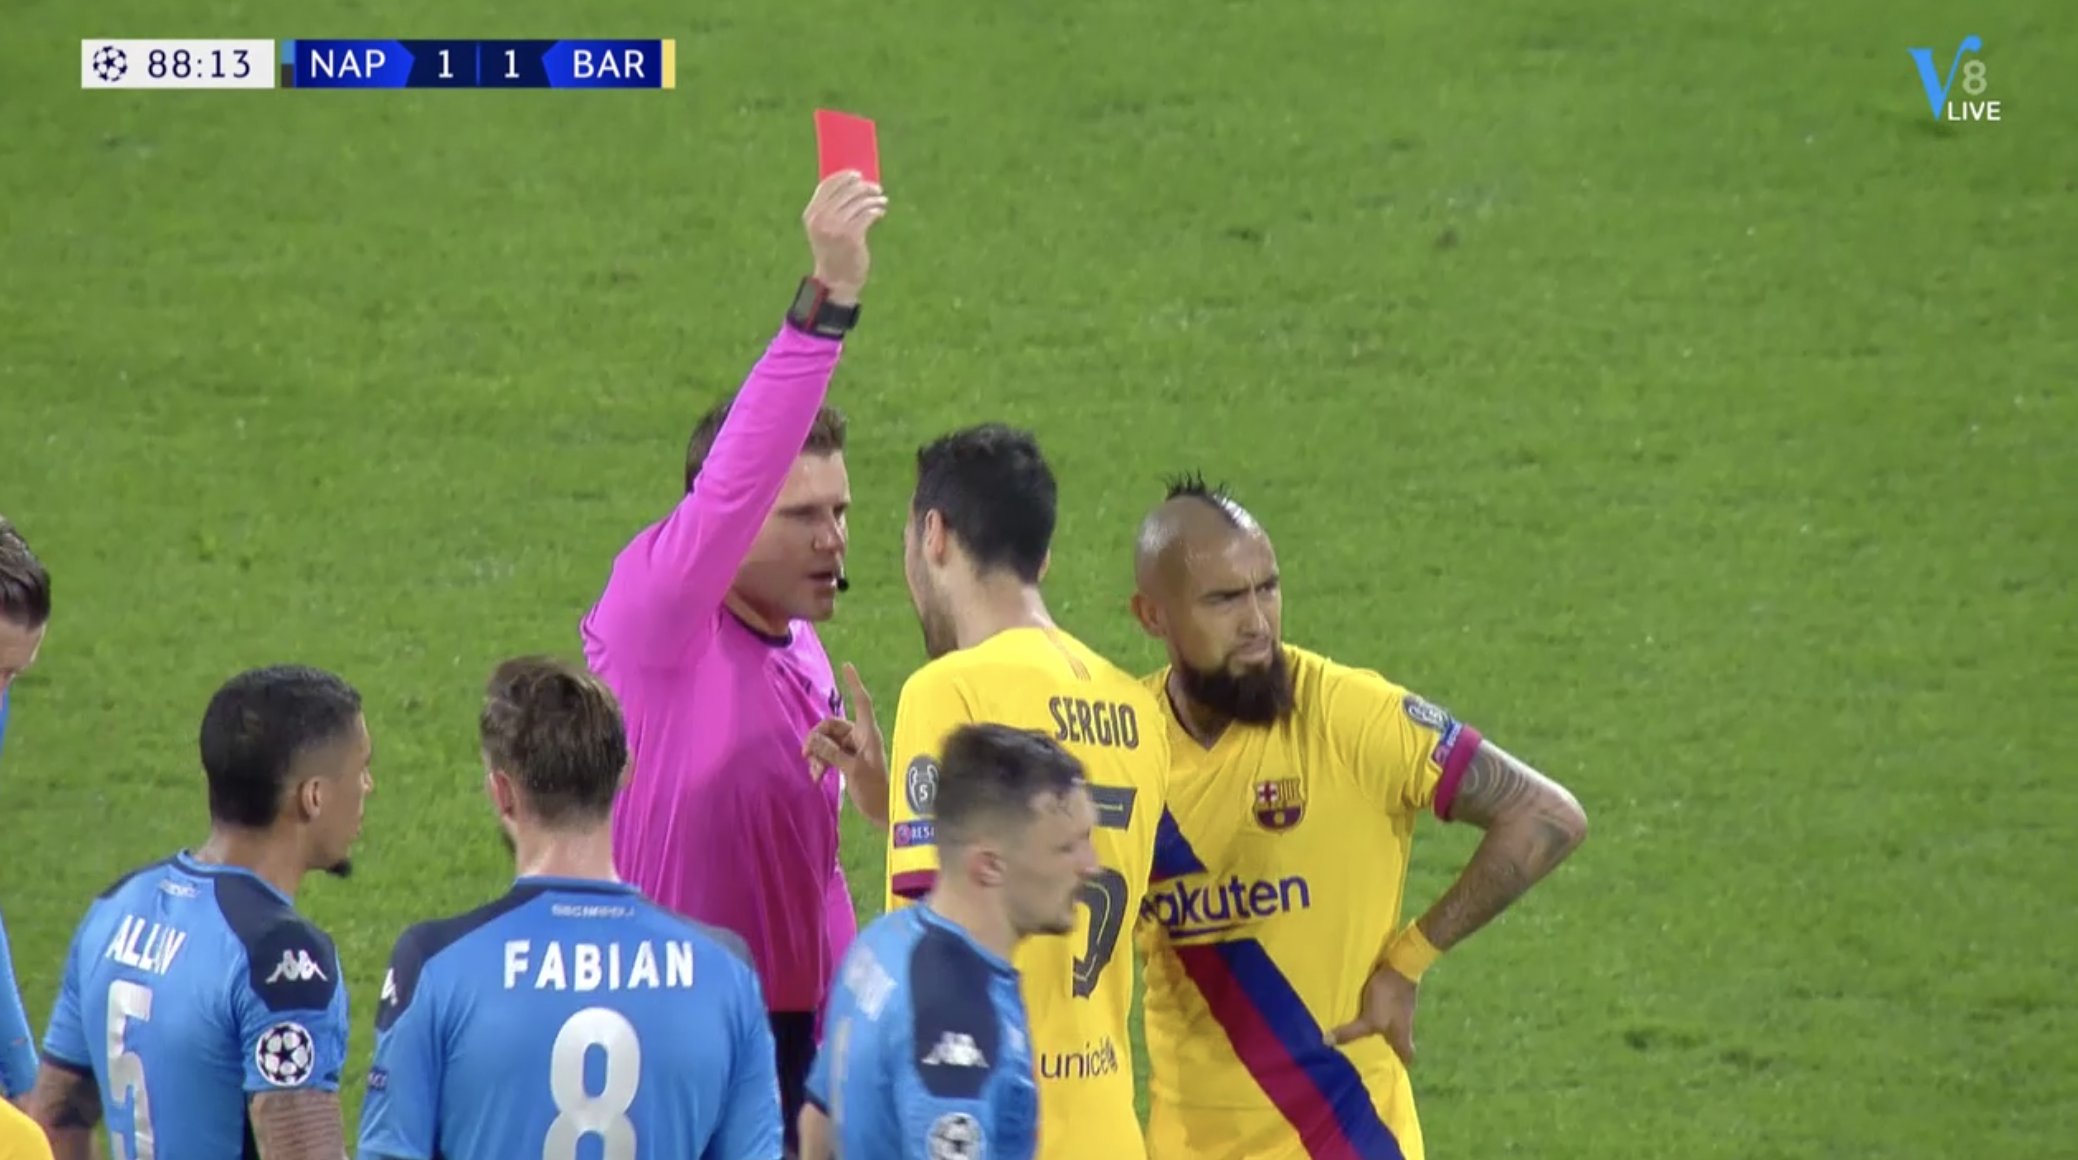 scrapbog Orator Bemærk venligst 𝐀𝐅𝐂 𝐀𝐉𝐀𝐗 💎 on Twitter: "📸 - Arturo Vidal receives a red card and  will be suspended for the 2nd leg, just like Busquets.  https://t.co/ffYVPQE1vM" / Twitter